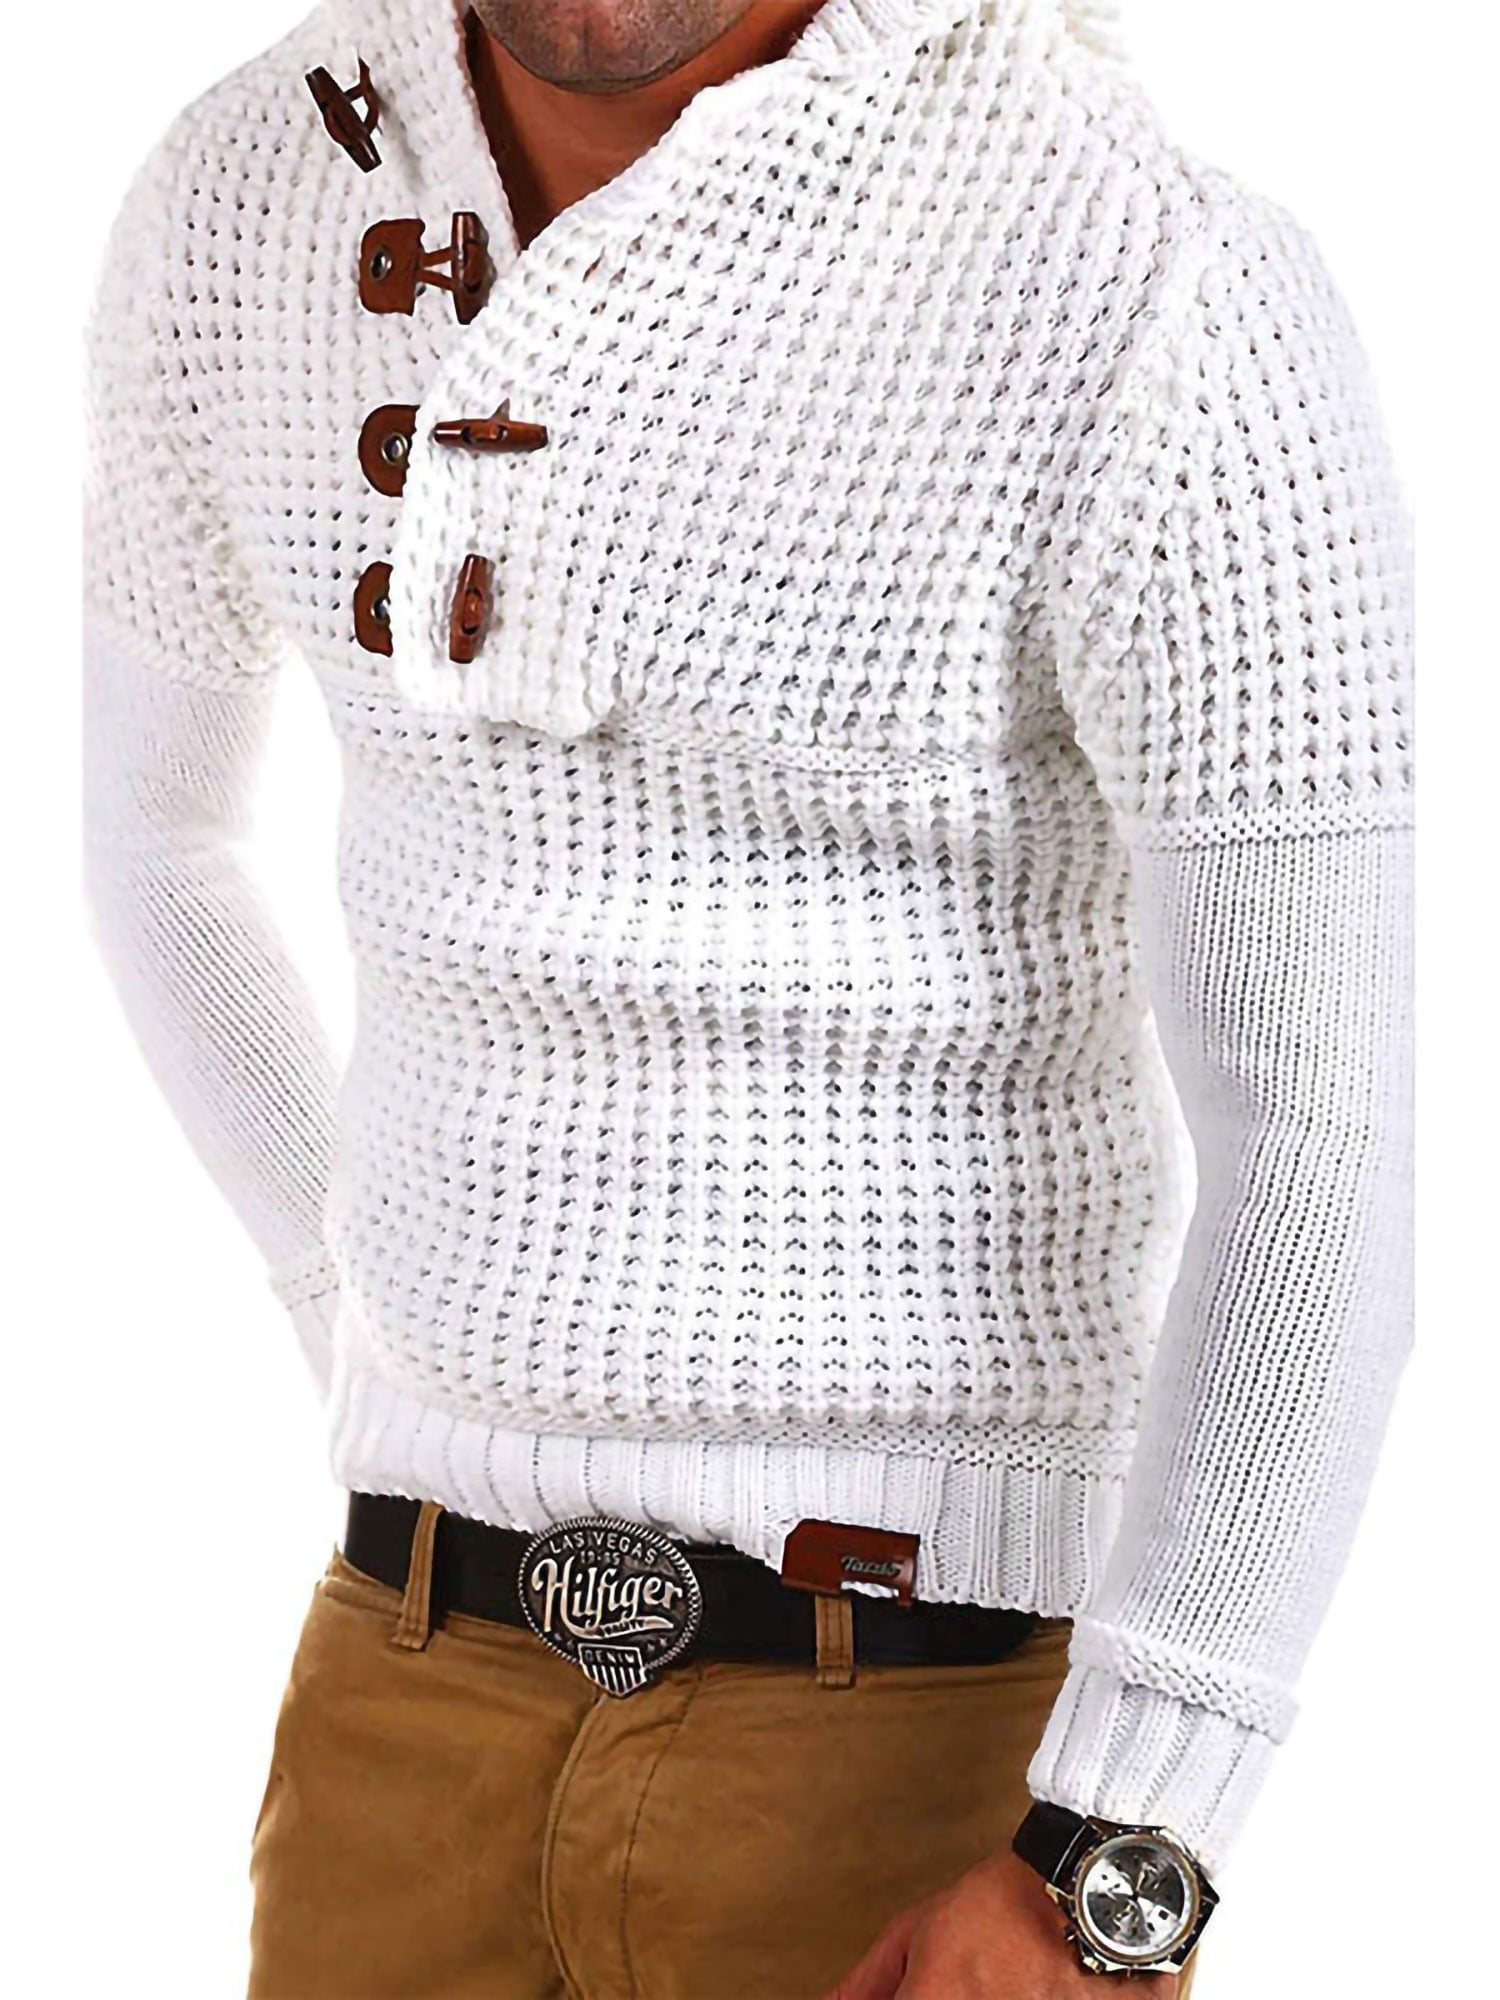 Cardigan Men's Winter Jumper Top Hooded Pullover Casual Knitwear Knitted Sweater